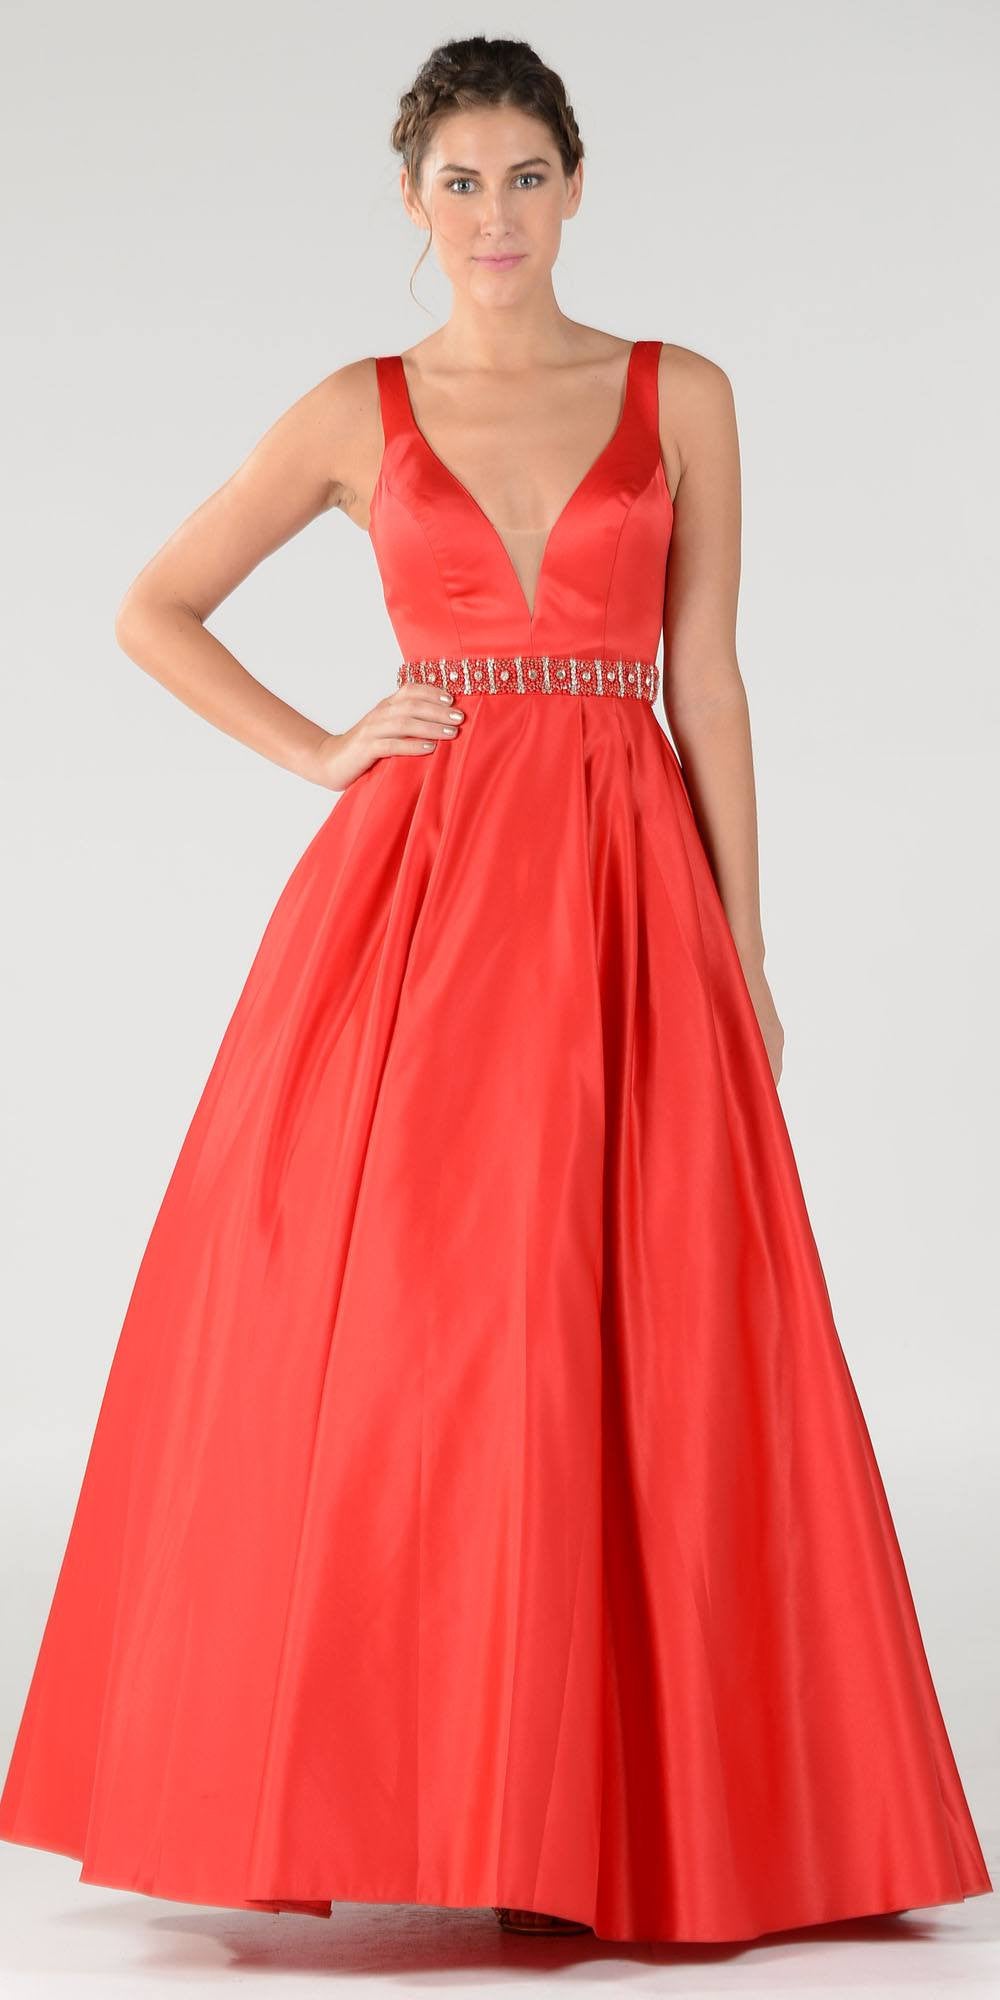 Poly USA 7932 Embellished Waist Plunging V-Neck Red Satin Ball Gown A-Line